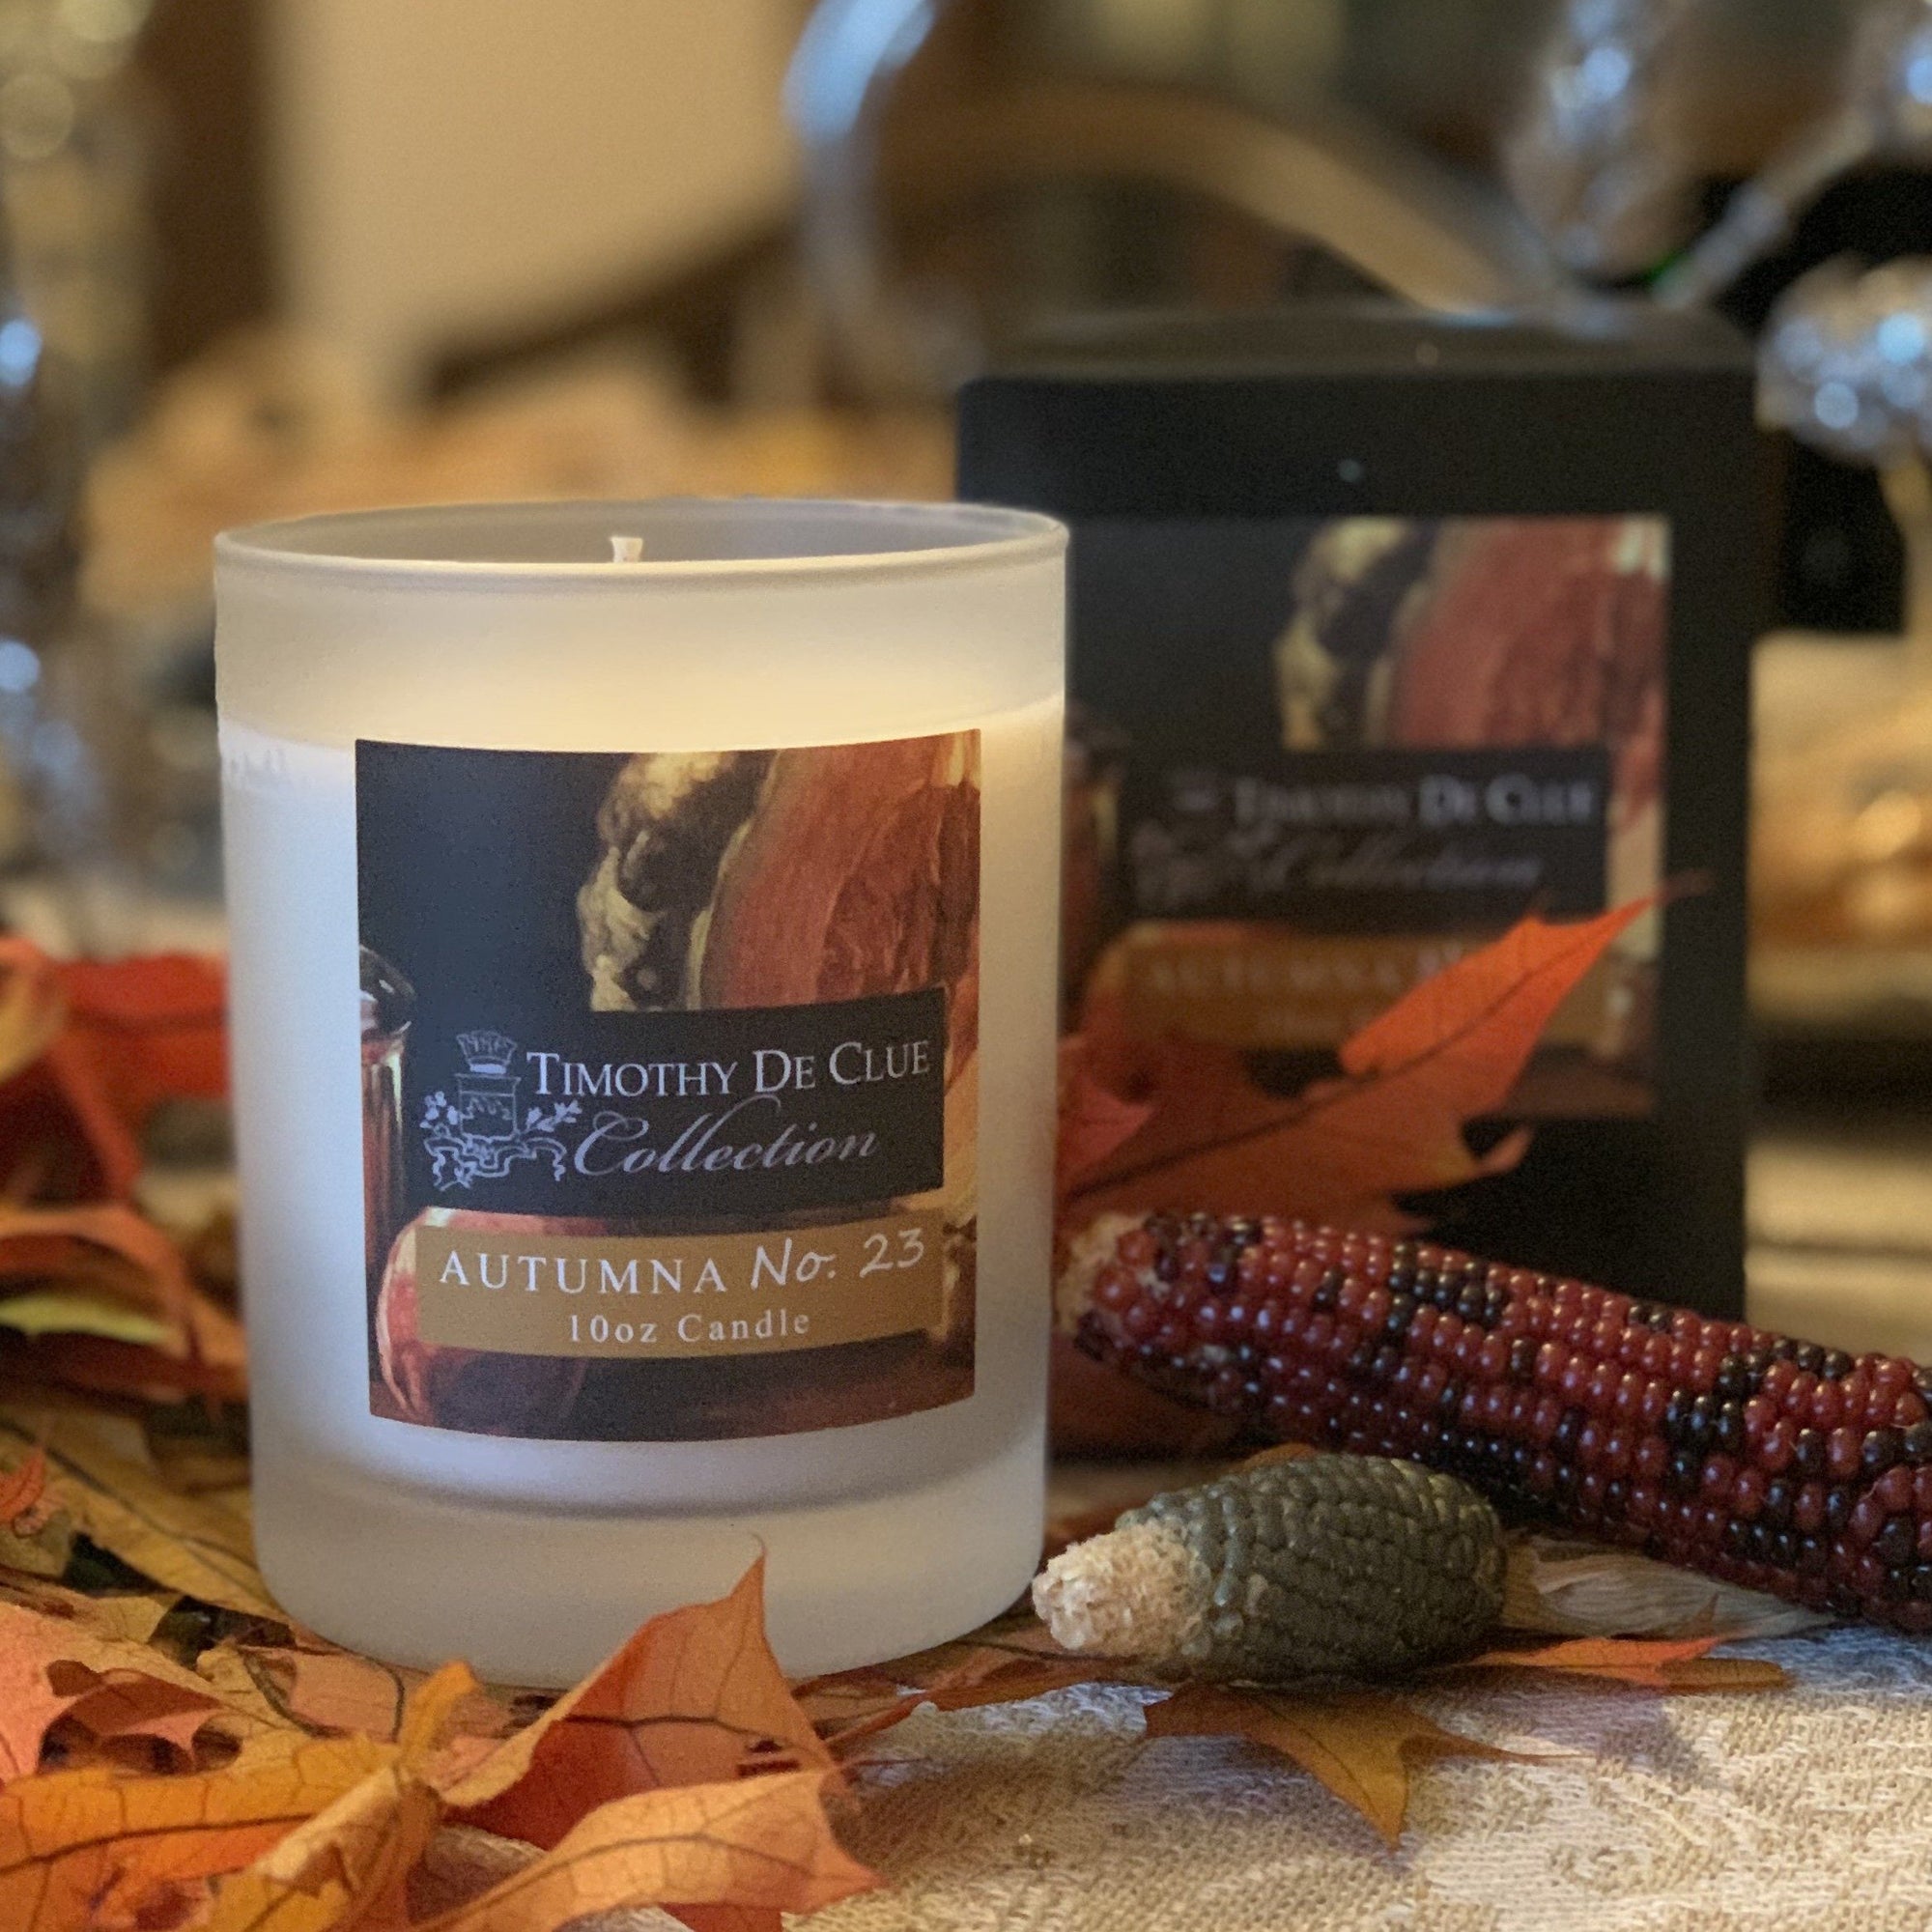 Autumna 10oz Frosted Candle Exclusive Home Scent By Timothy De Clue Collection